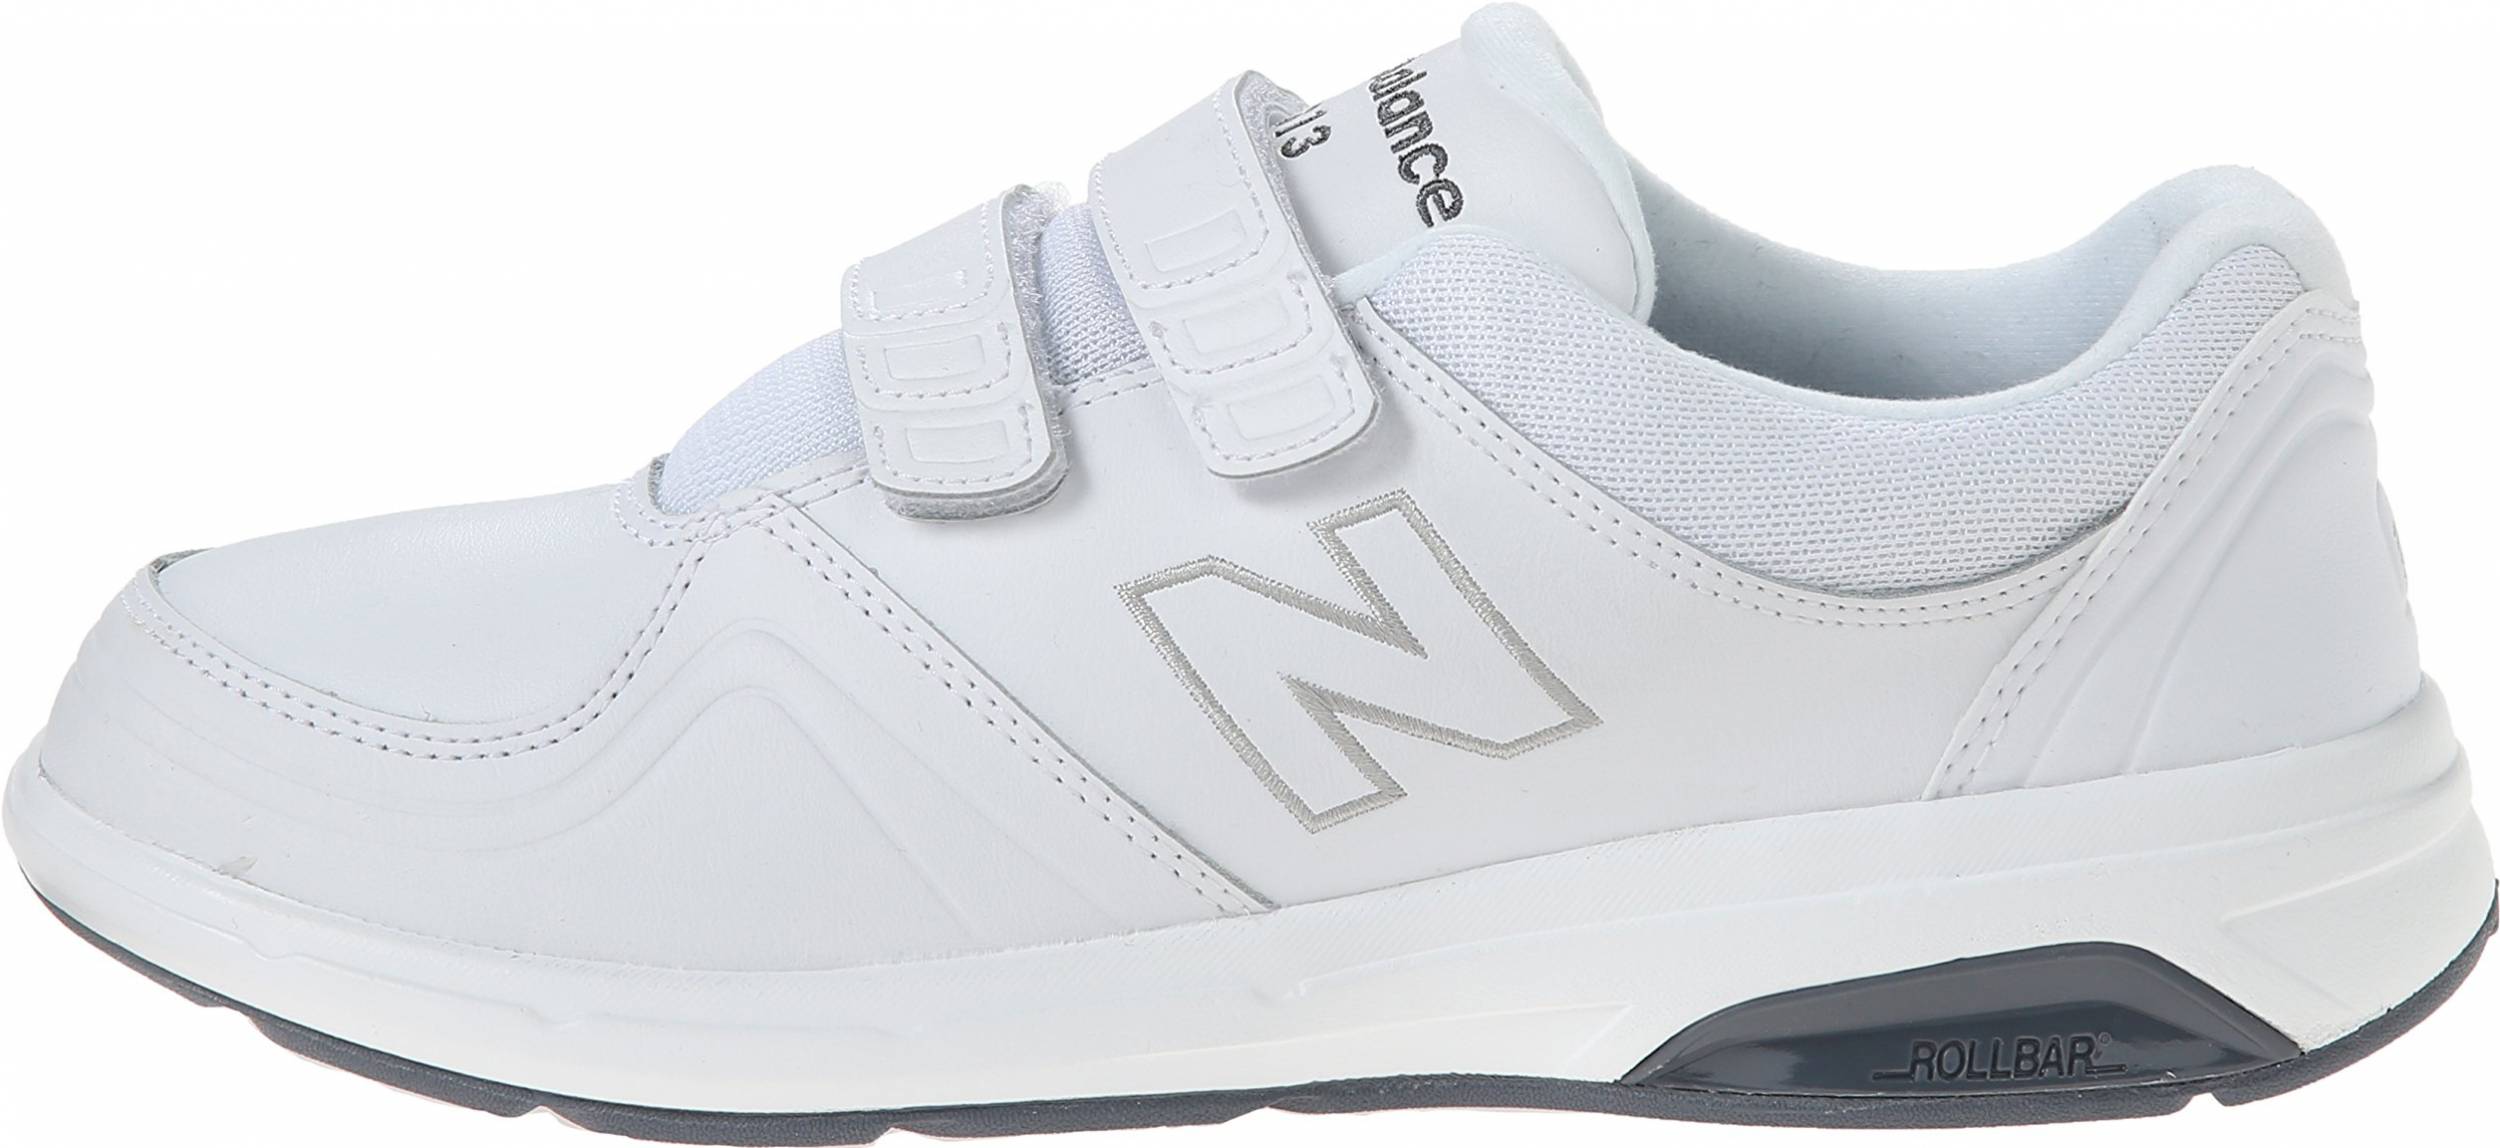 New Balance Hook and Loop 813 - Deals, Facts, Reviews (2021 ...